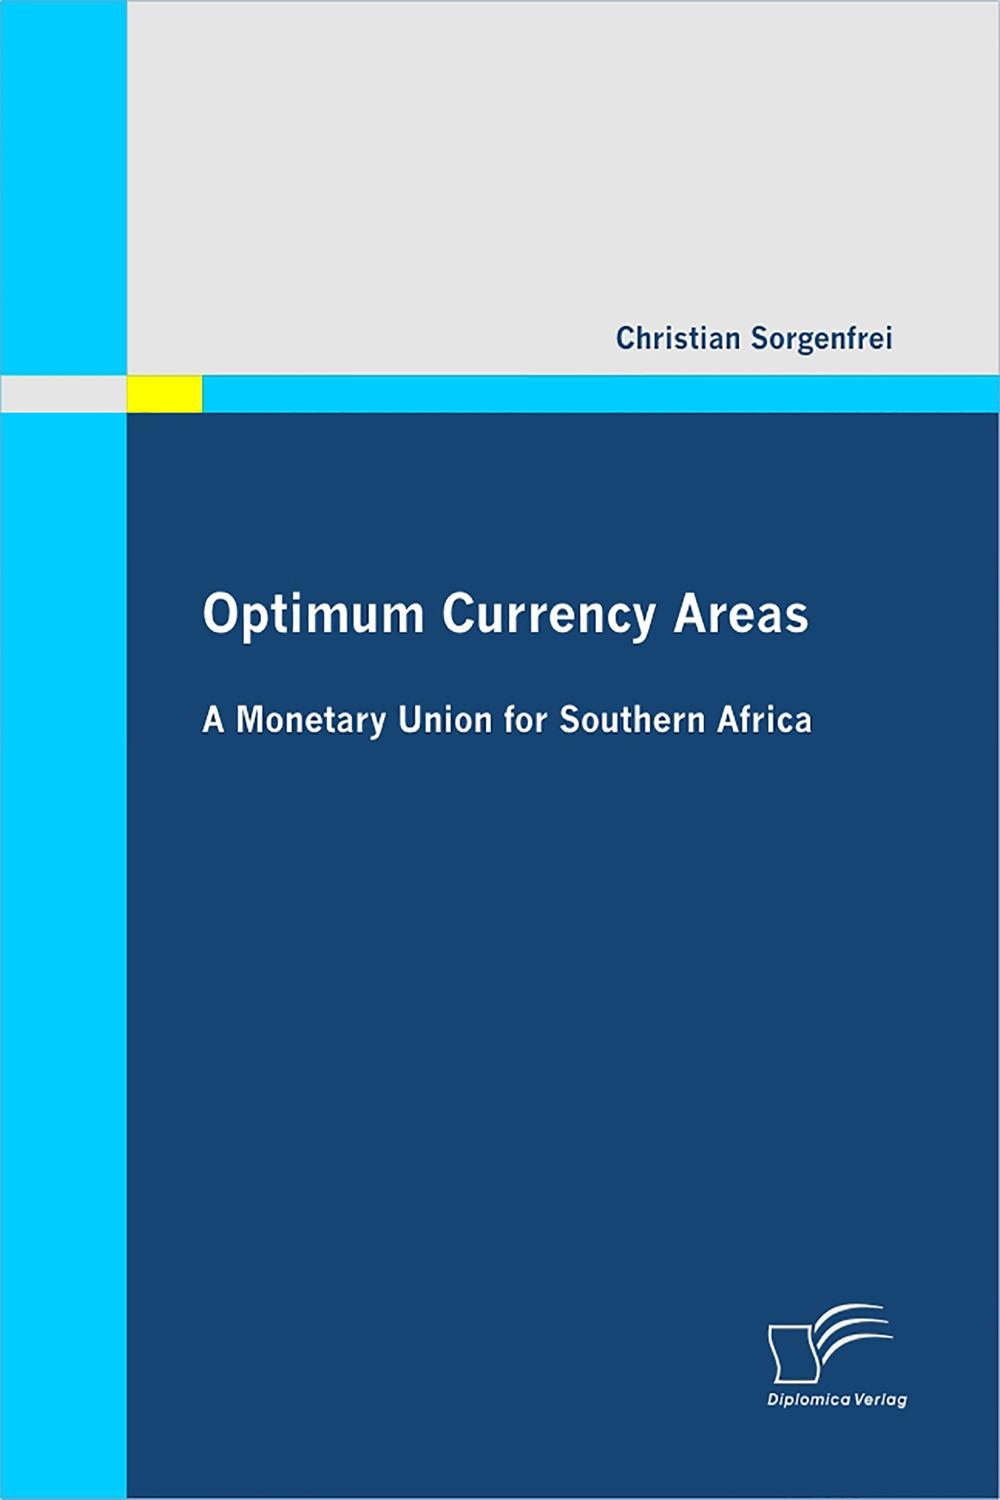 Optimum Currency Areas: A Monetary Union for Southern Africa - Christian Sorgenfrei